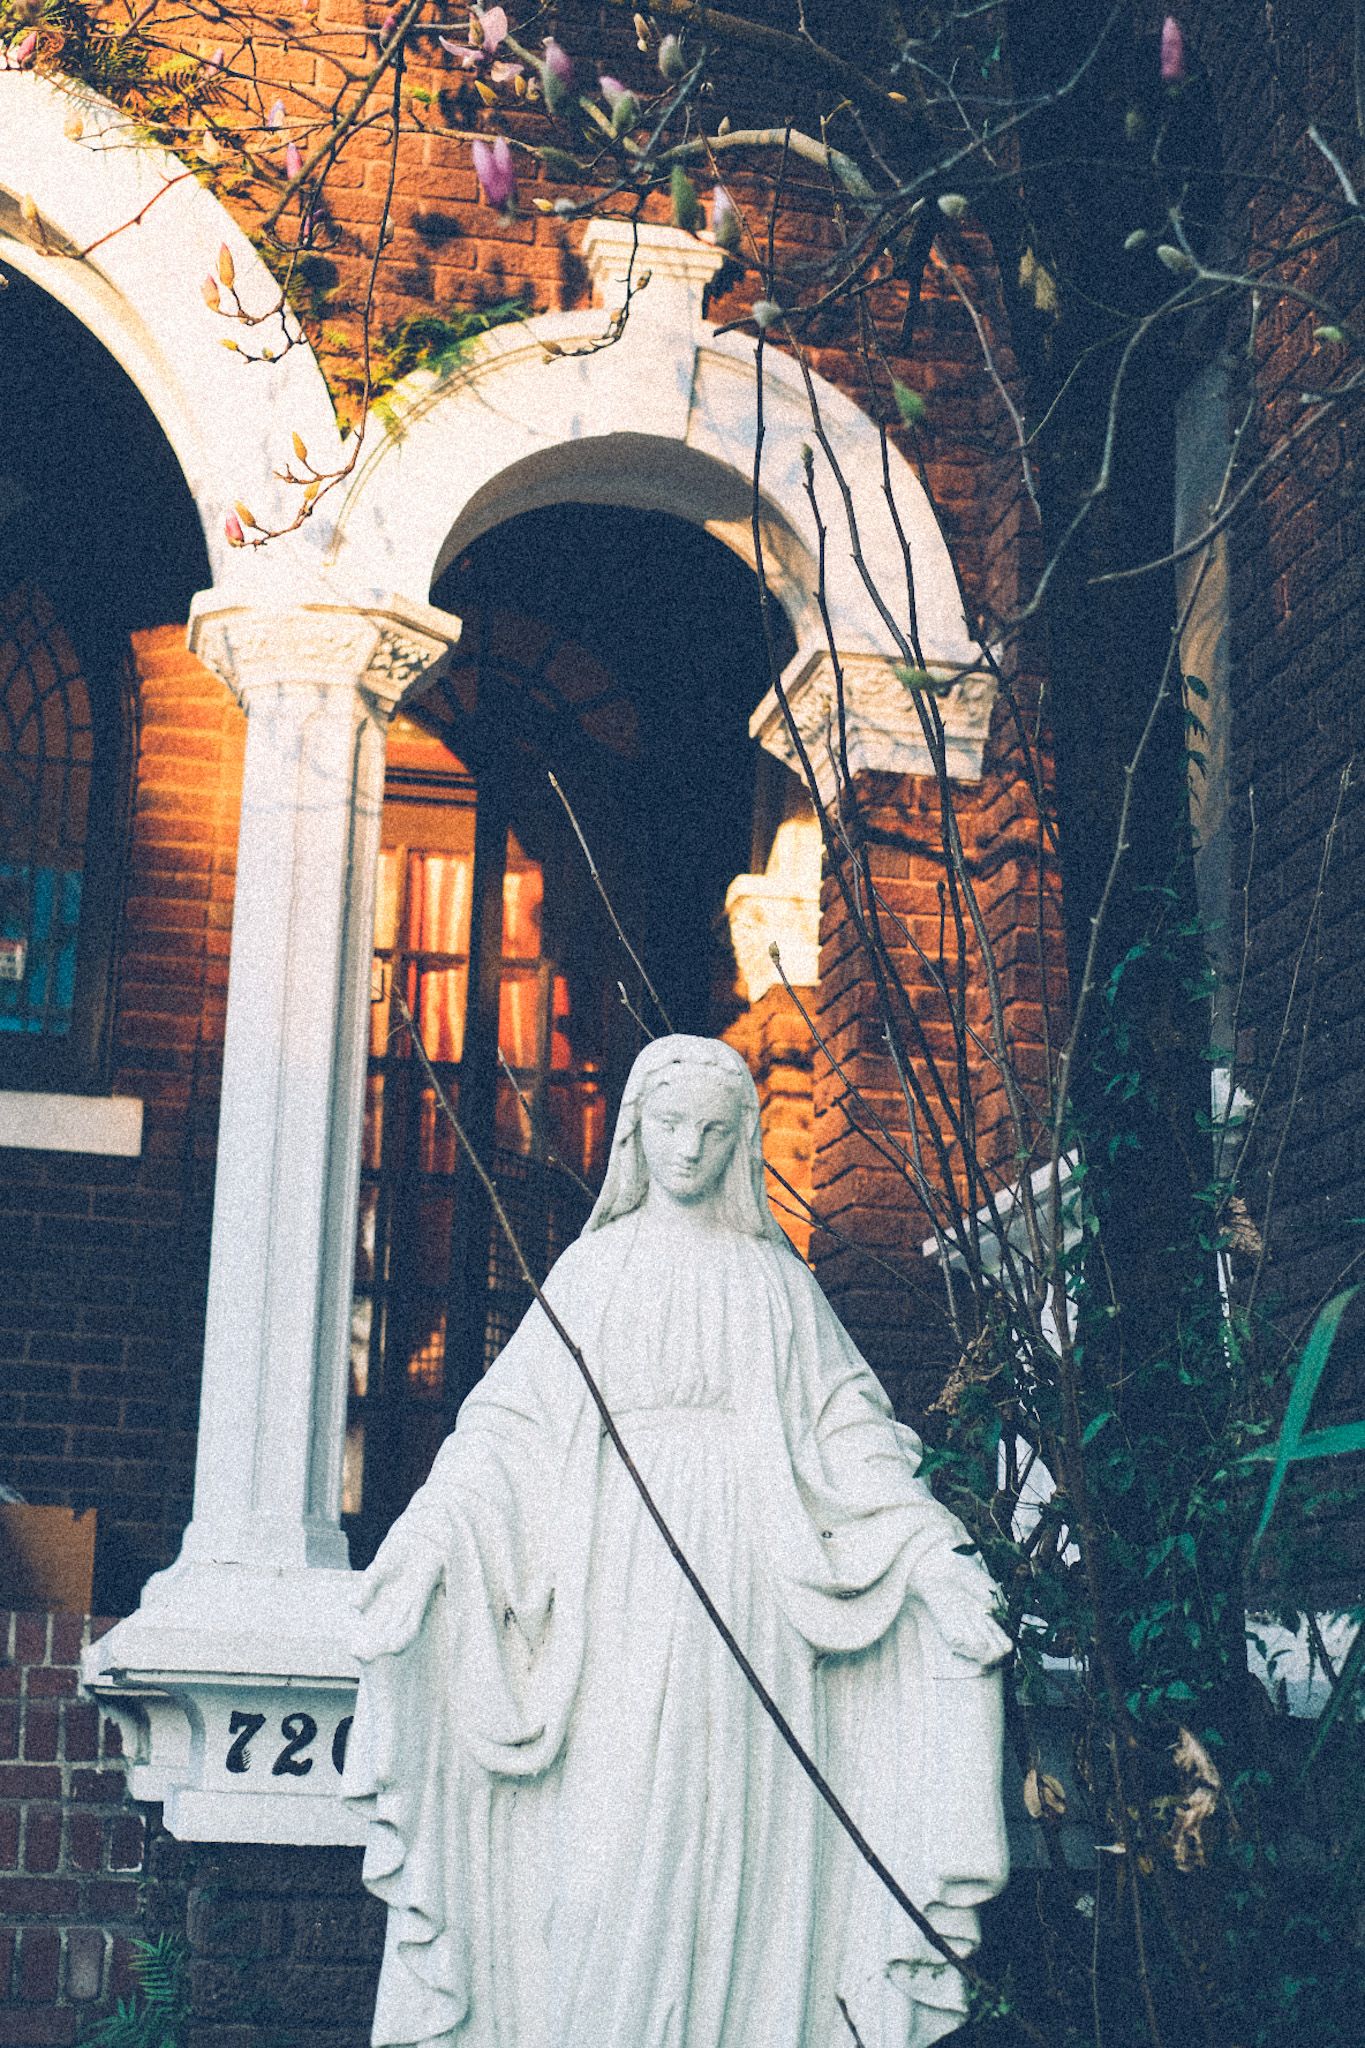 A statue of the Virgin Mary stands in front of an old, beautiful brick house, patches of afternoon light seen in the background.